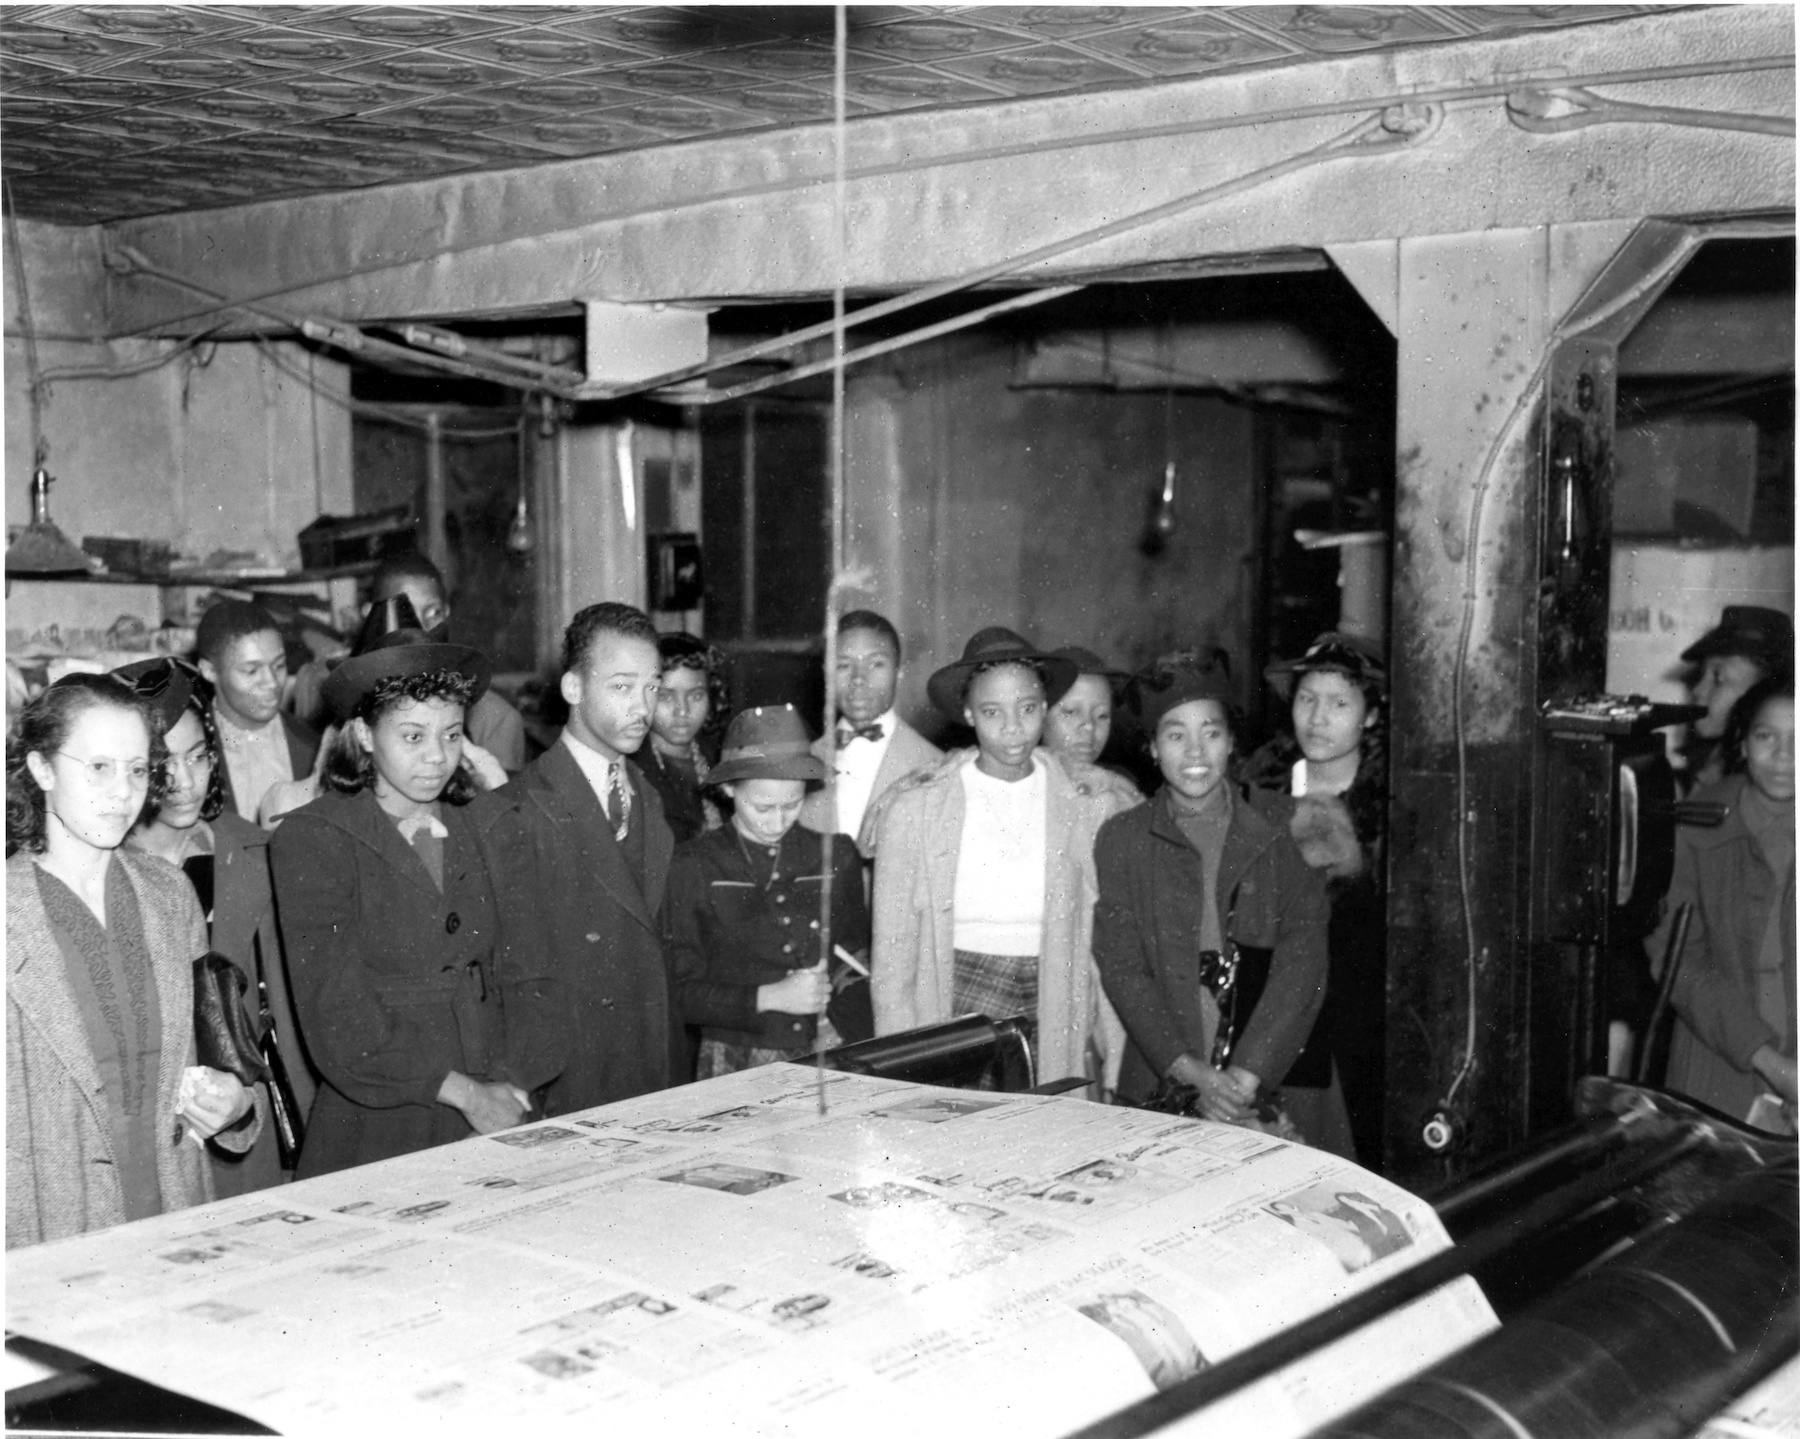 In this undated 1940s photo, students tour the printing plant of the Atlanta Daily World, Atlanta's oldest Black newspaper. During the Jim Crow era, Black newspapers played an important role in challenging white supremacy